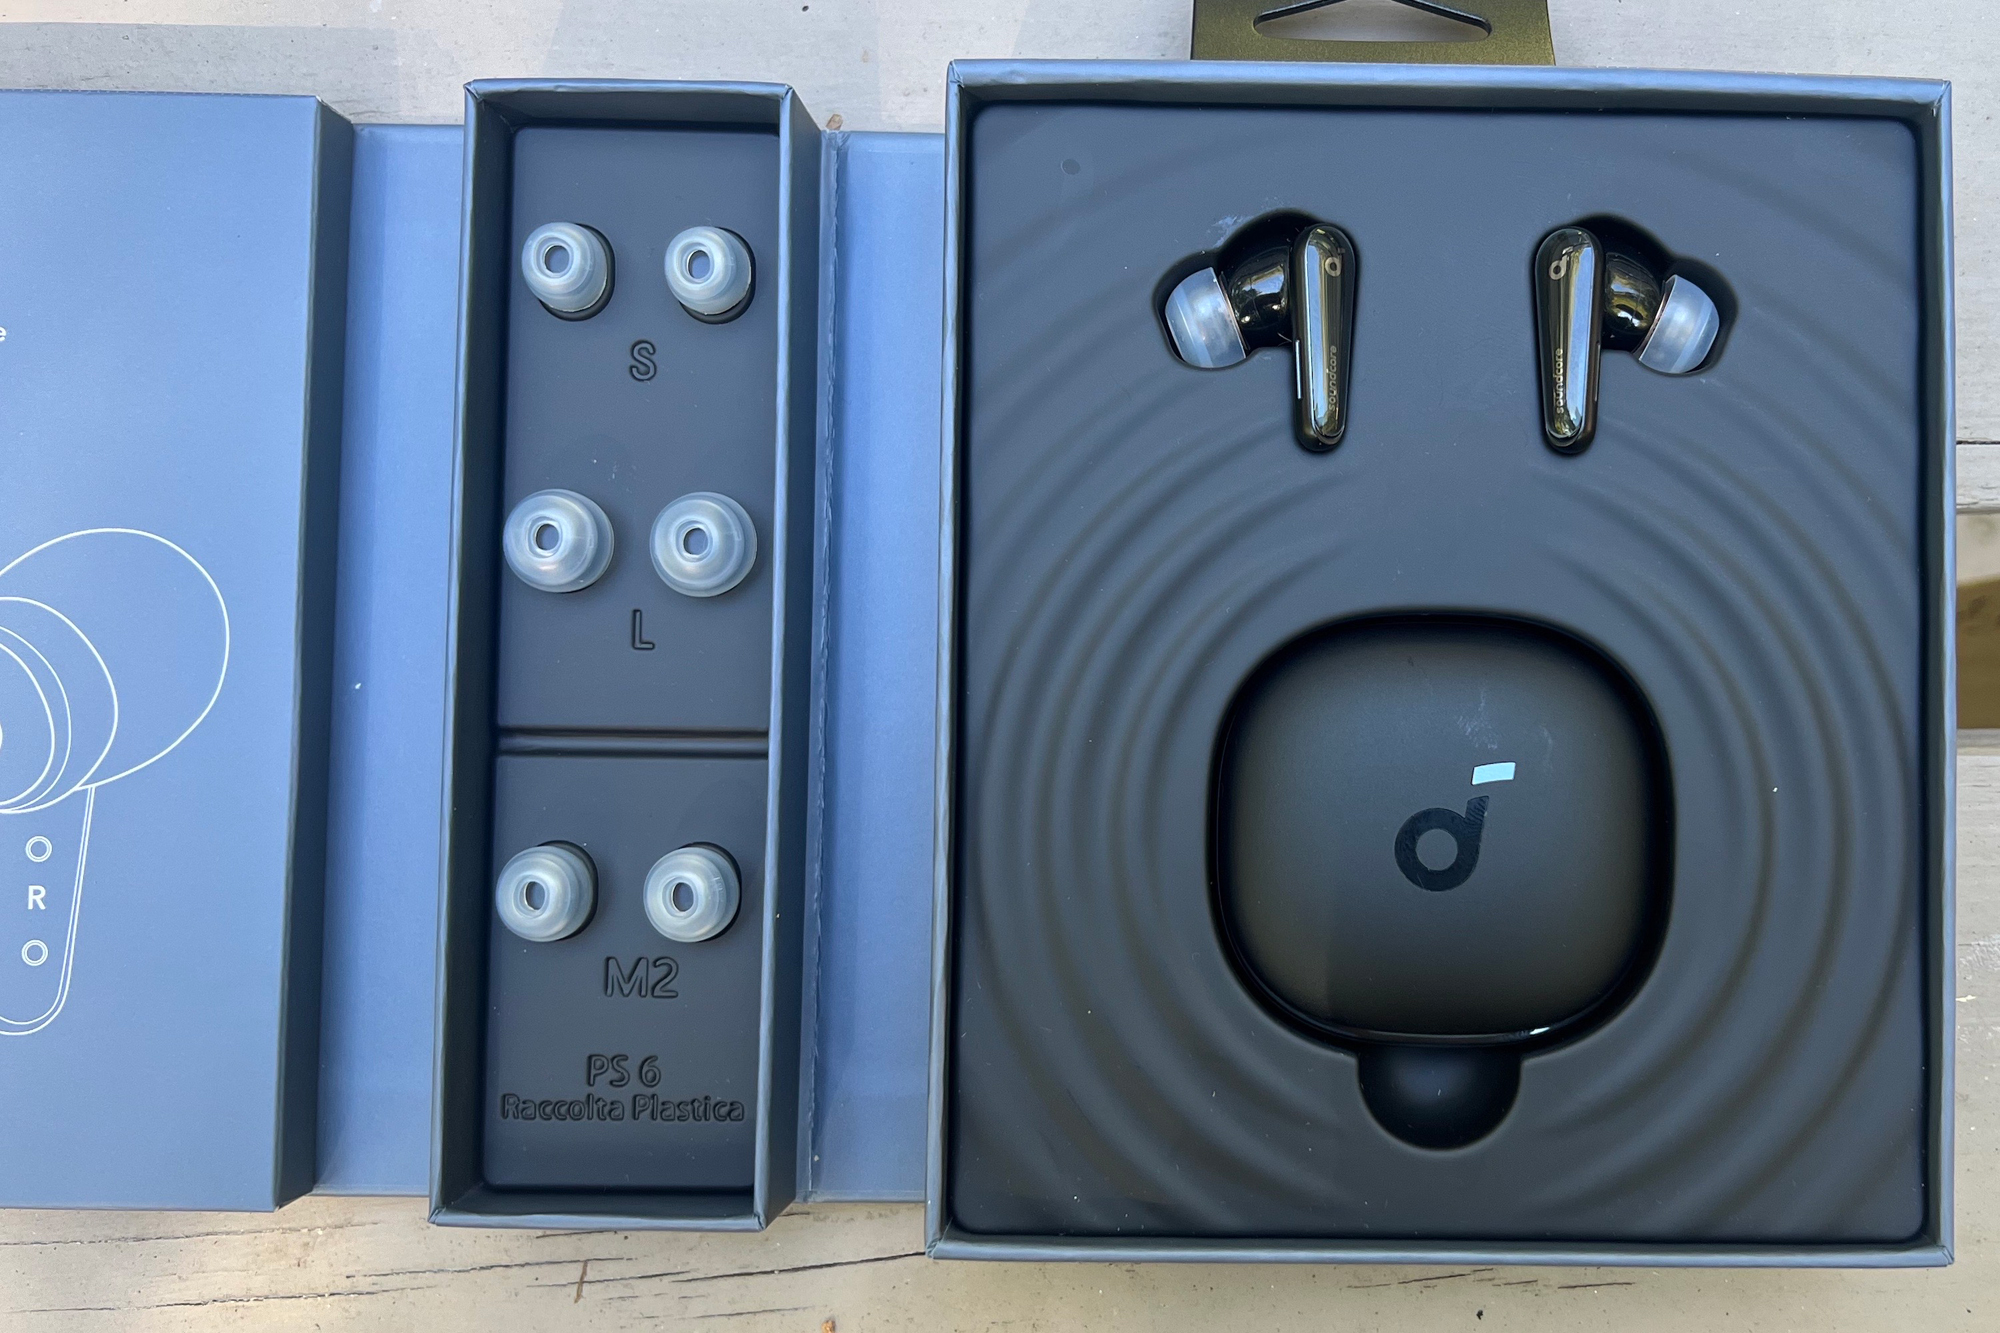 Anker Soundcore Liberty 4 review: Great sound, fabulous value